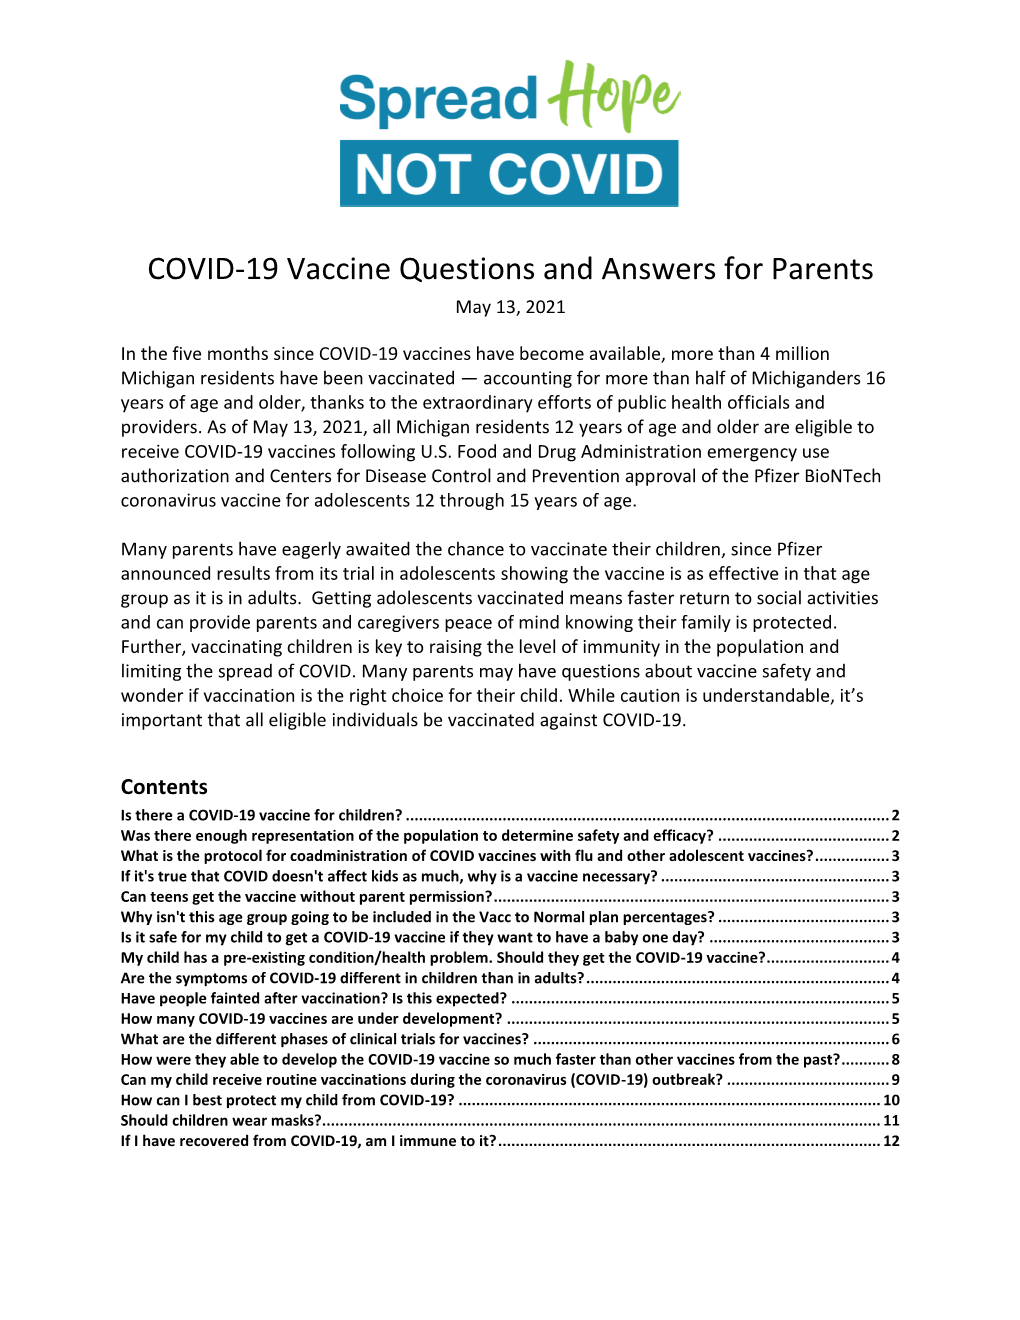 COVID-19 Vaccine Questions and Answers for Parents May 13, 2021